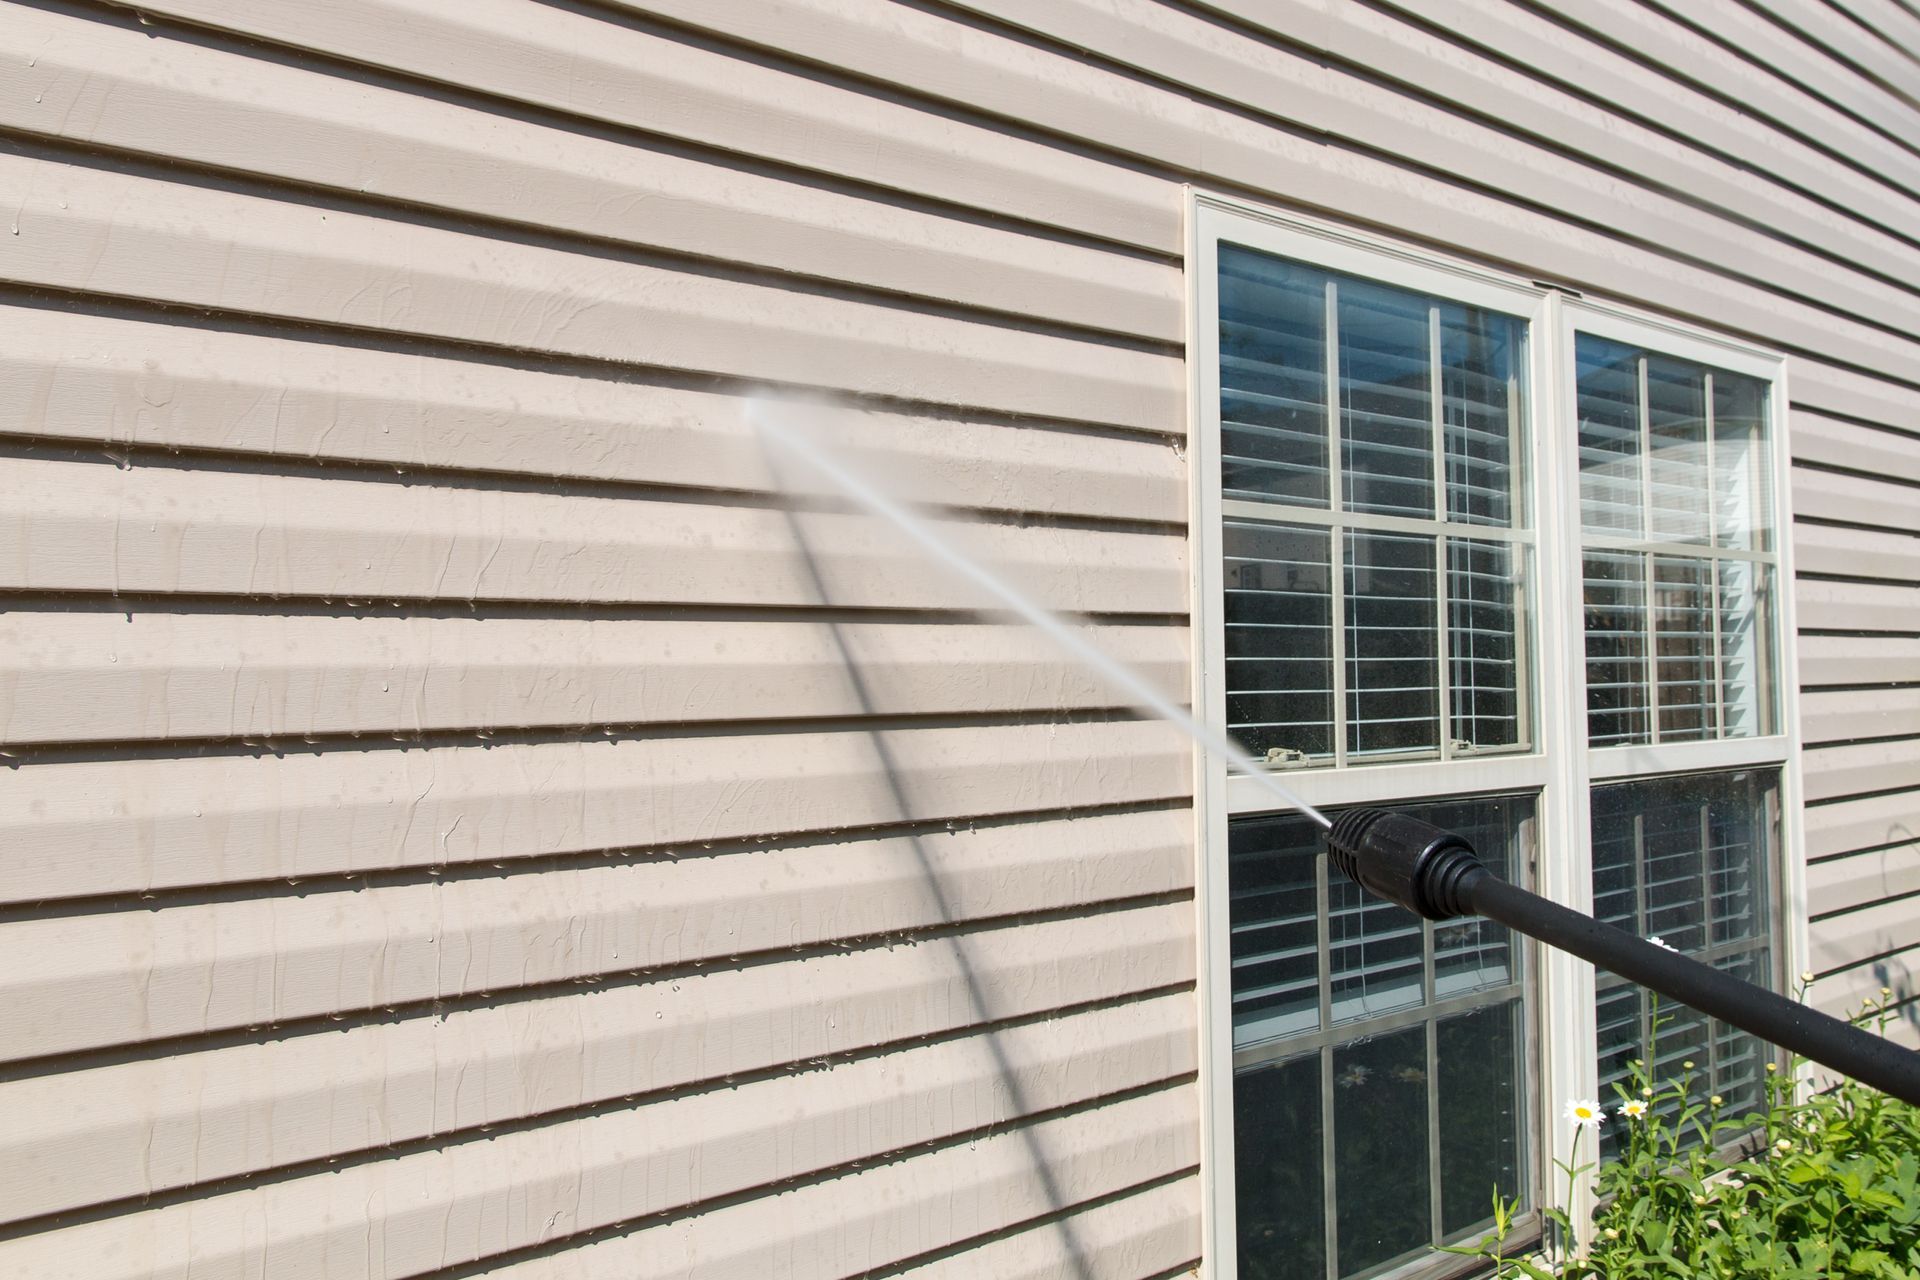 A person is cleaning the side of a house with a high pressure washer.